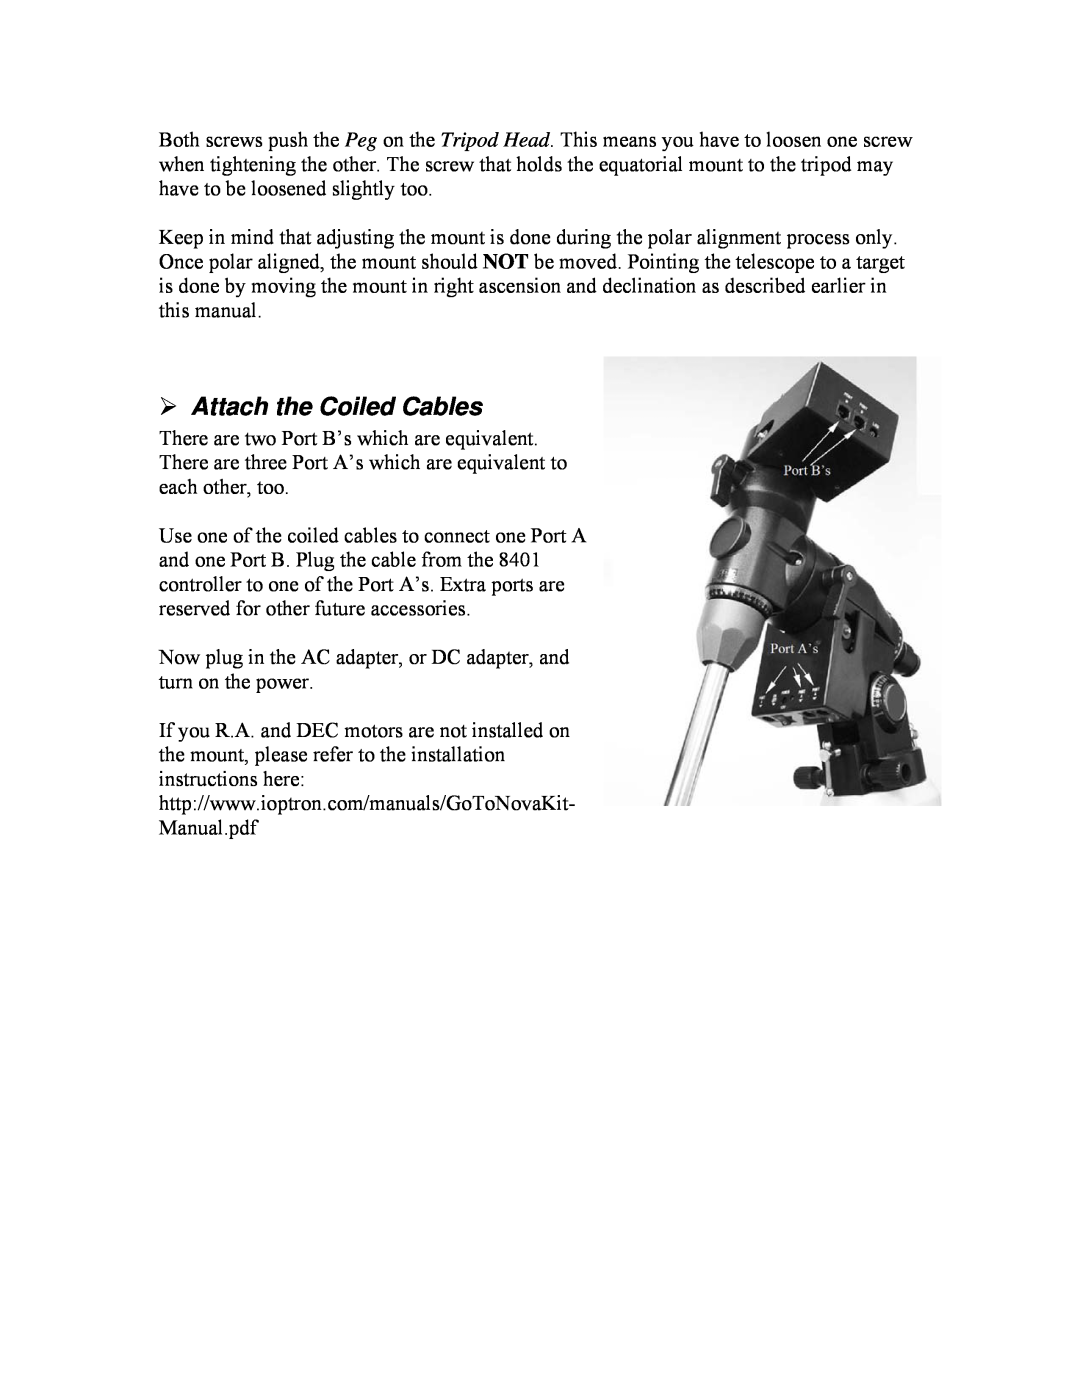 iOptron PR EQ manual Attach the Coiled Cables 